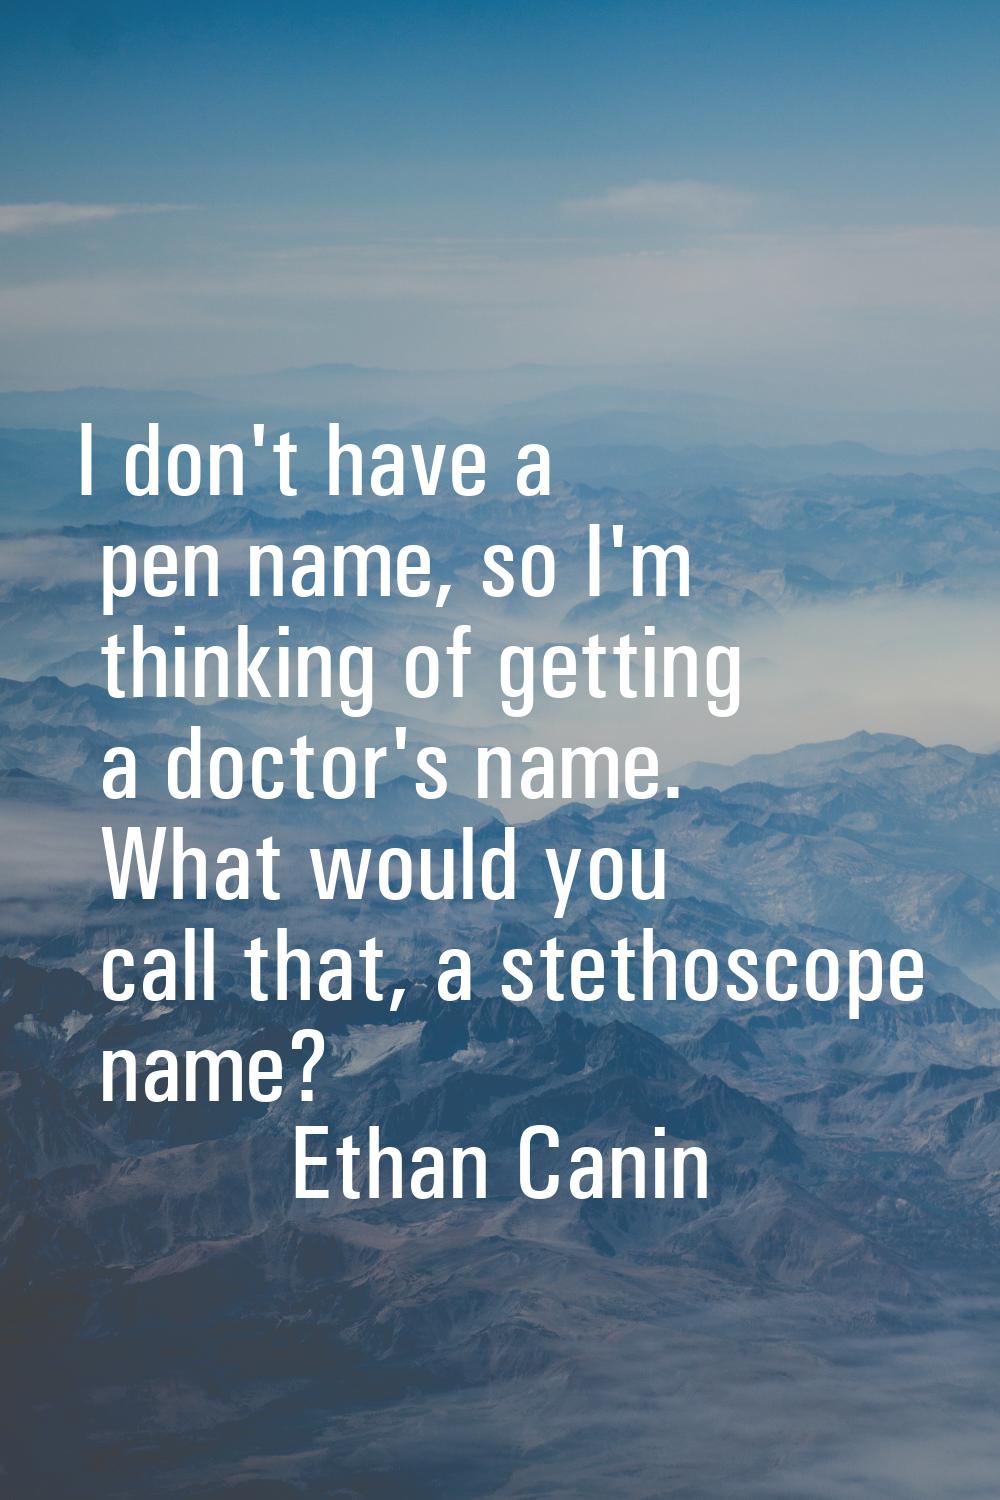 I don't have a pen name, so I'm thinking of getting a doctor's name. What would you call that, a st